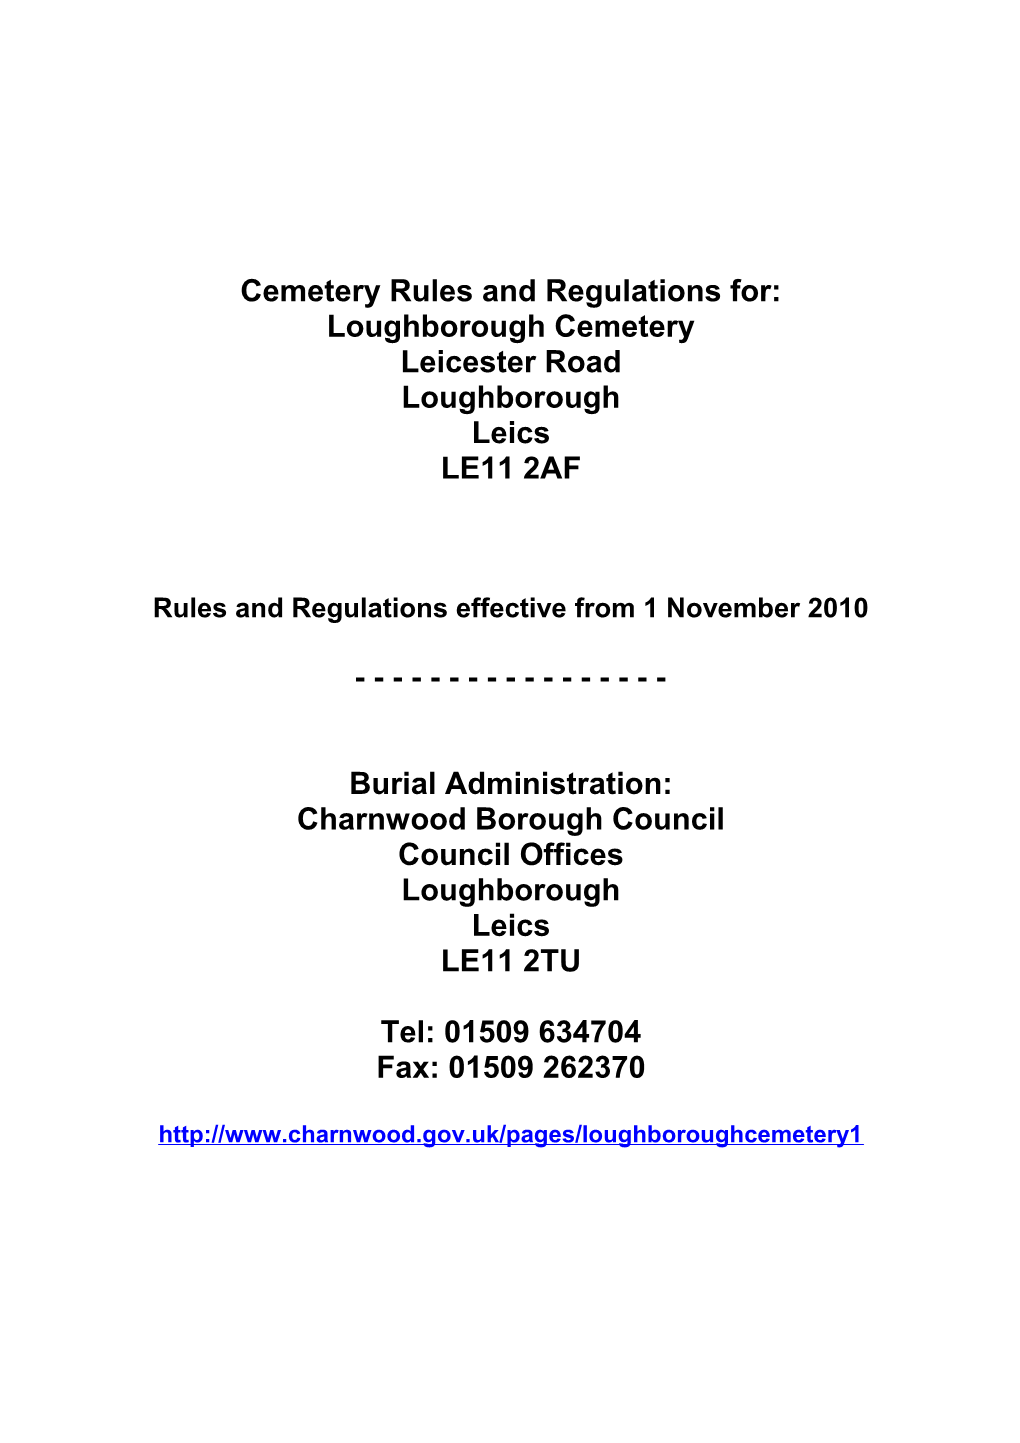 Cemetery Rules and Regulations For